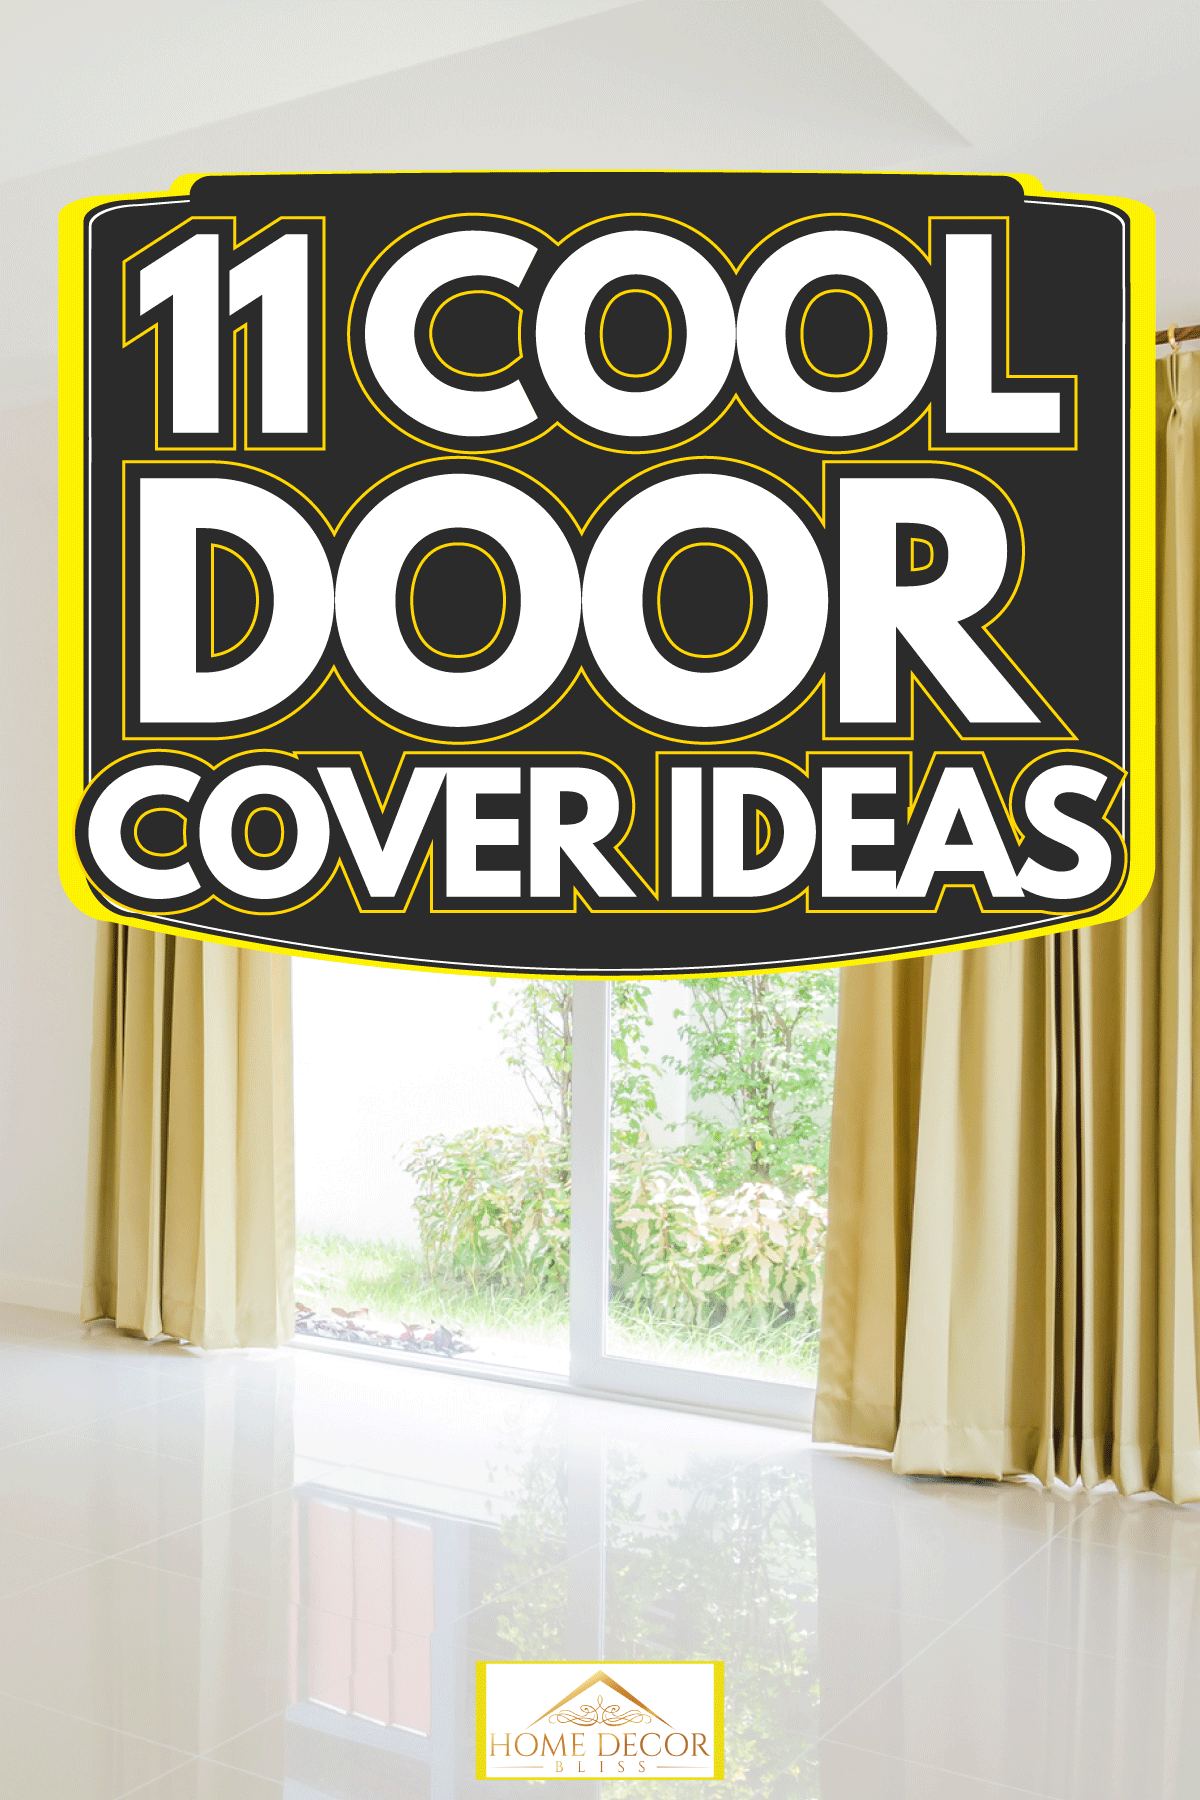 Empty room and blinds interior, 11 Cool Door Cover Ideas